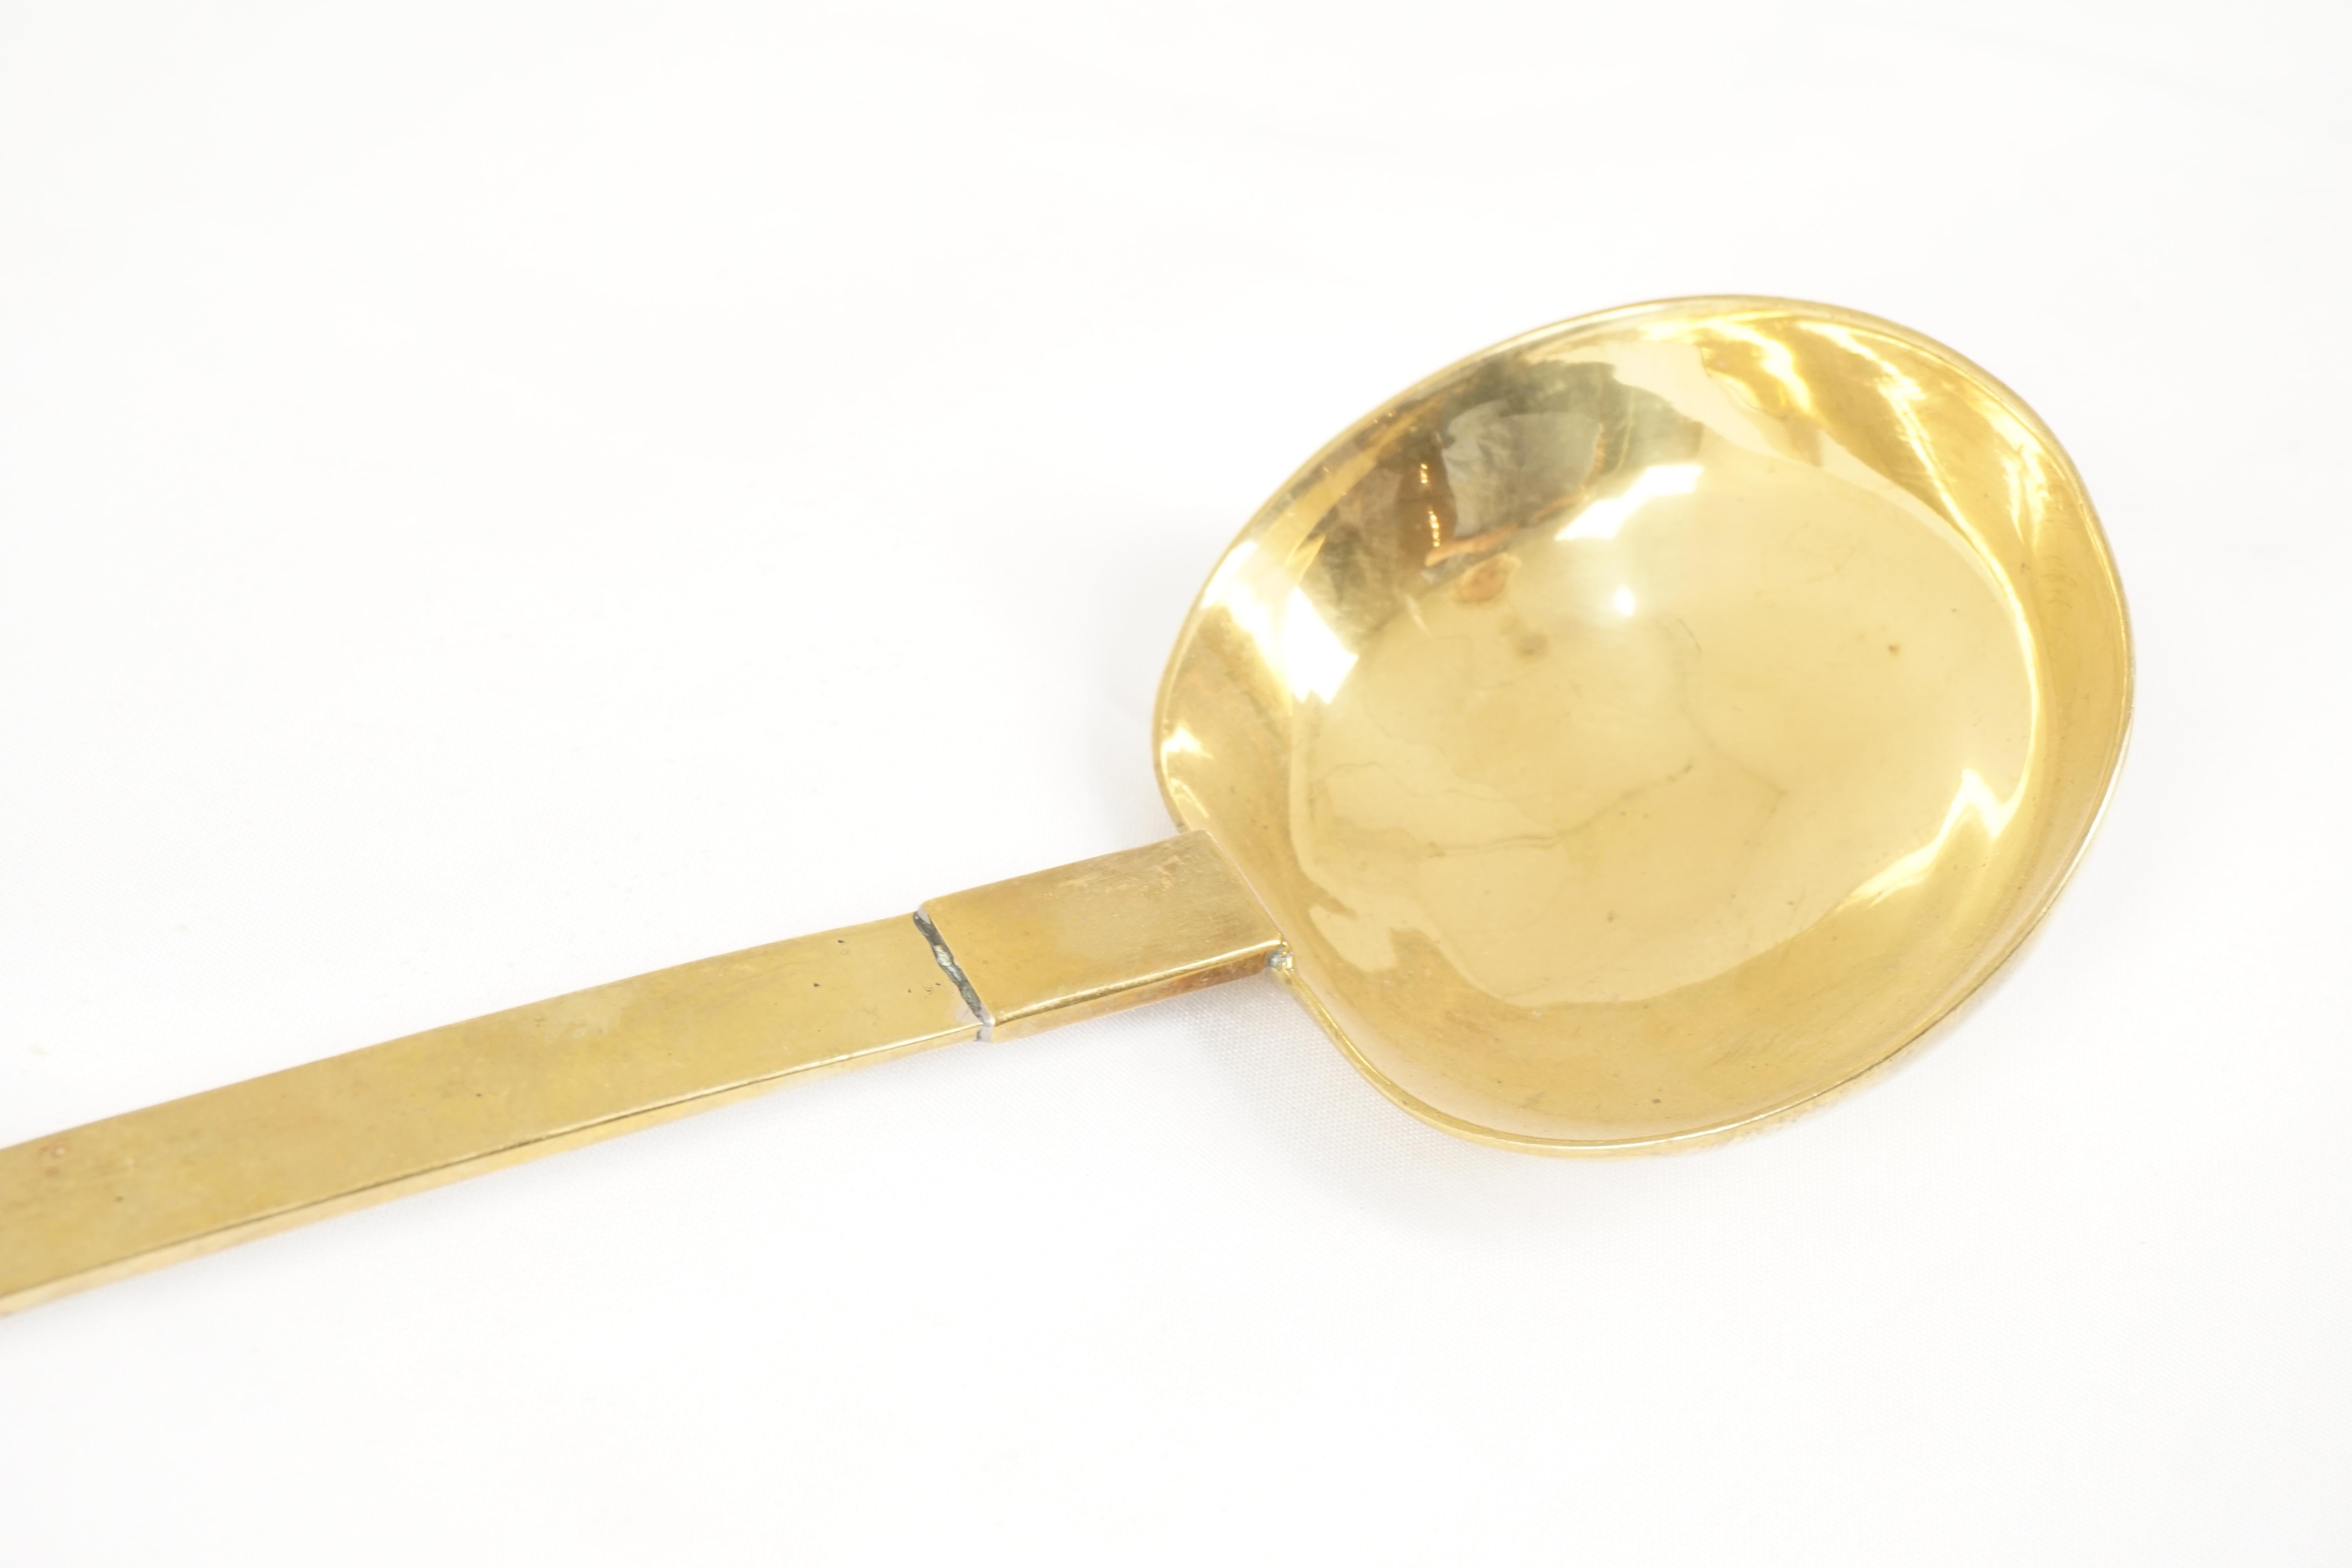 Late 19th Century Antique Brass Ladle, Victorian, Country House Kitchen, Scotland, 1880